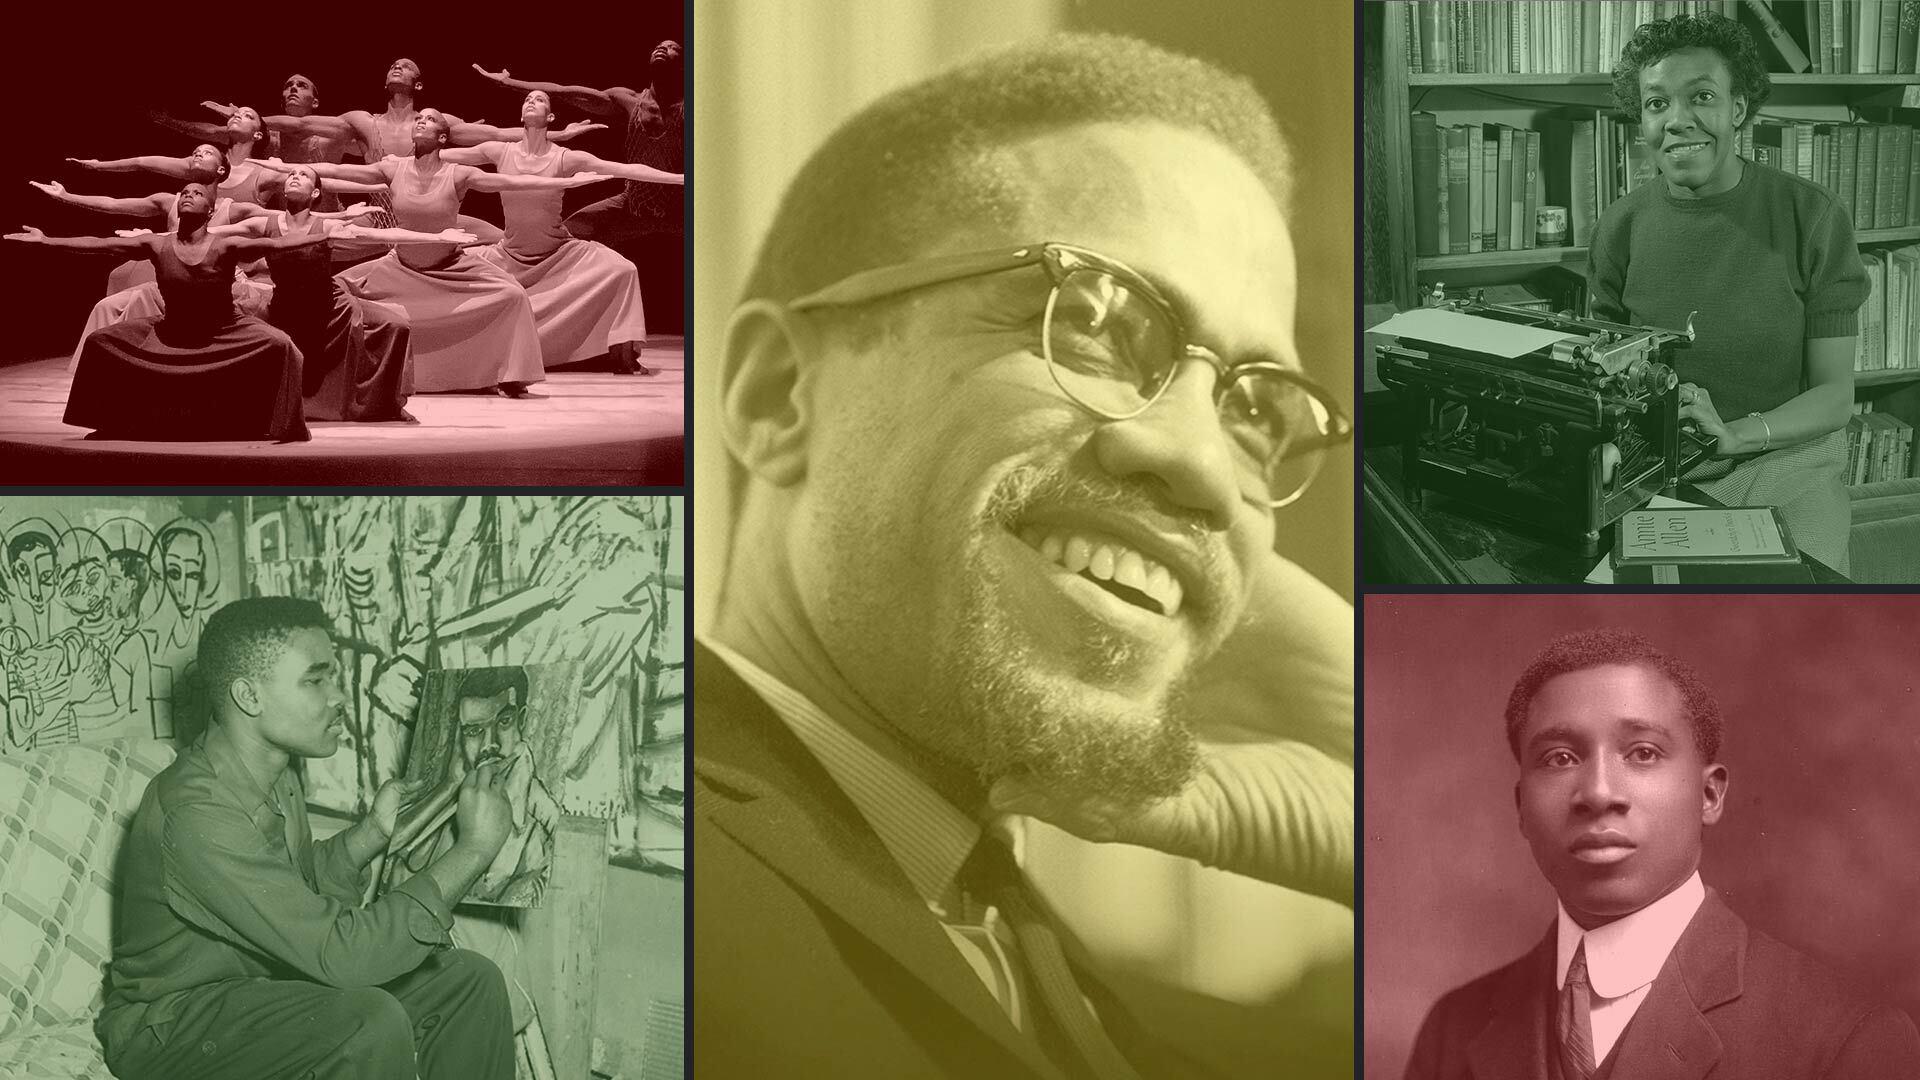 collage of Malcolm X, David C. Driskell, dancers performing, Gwendolyn Brooks and R. Nathaniel Dett